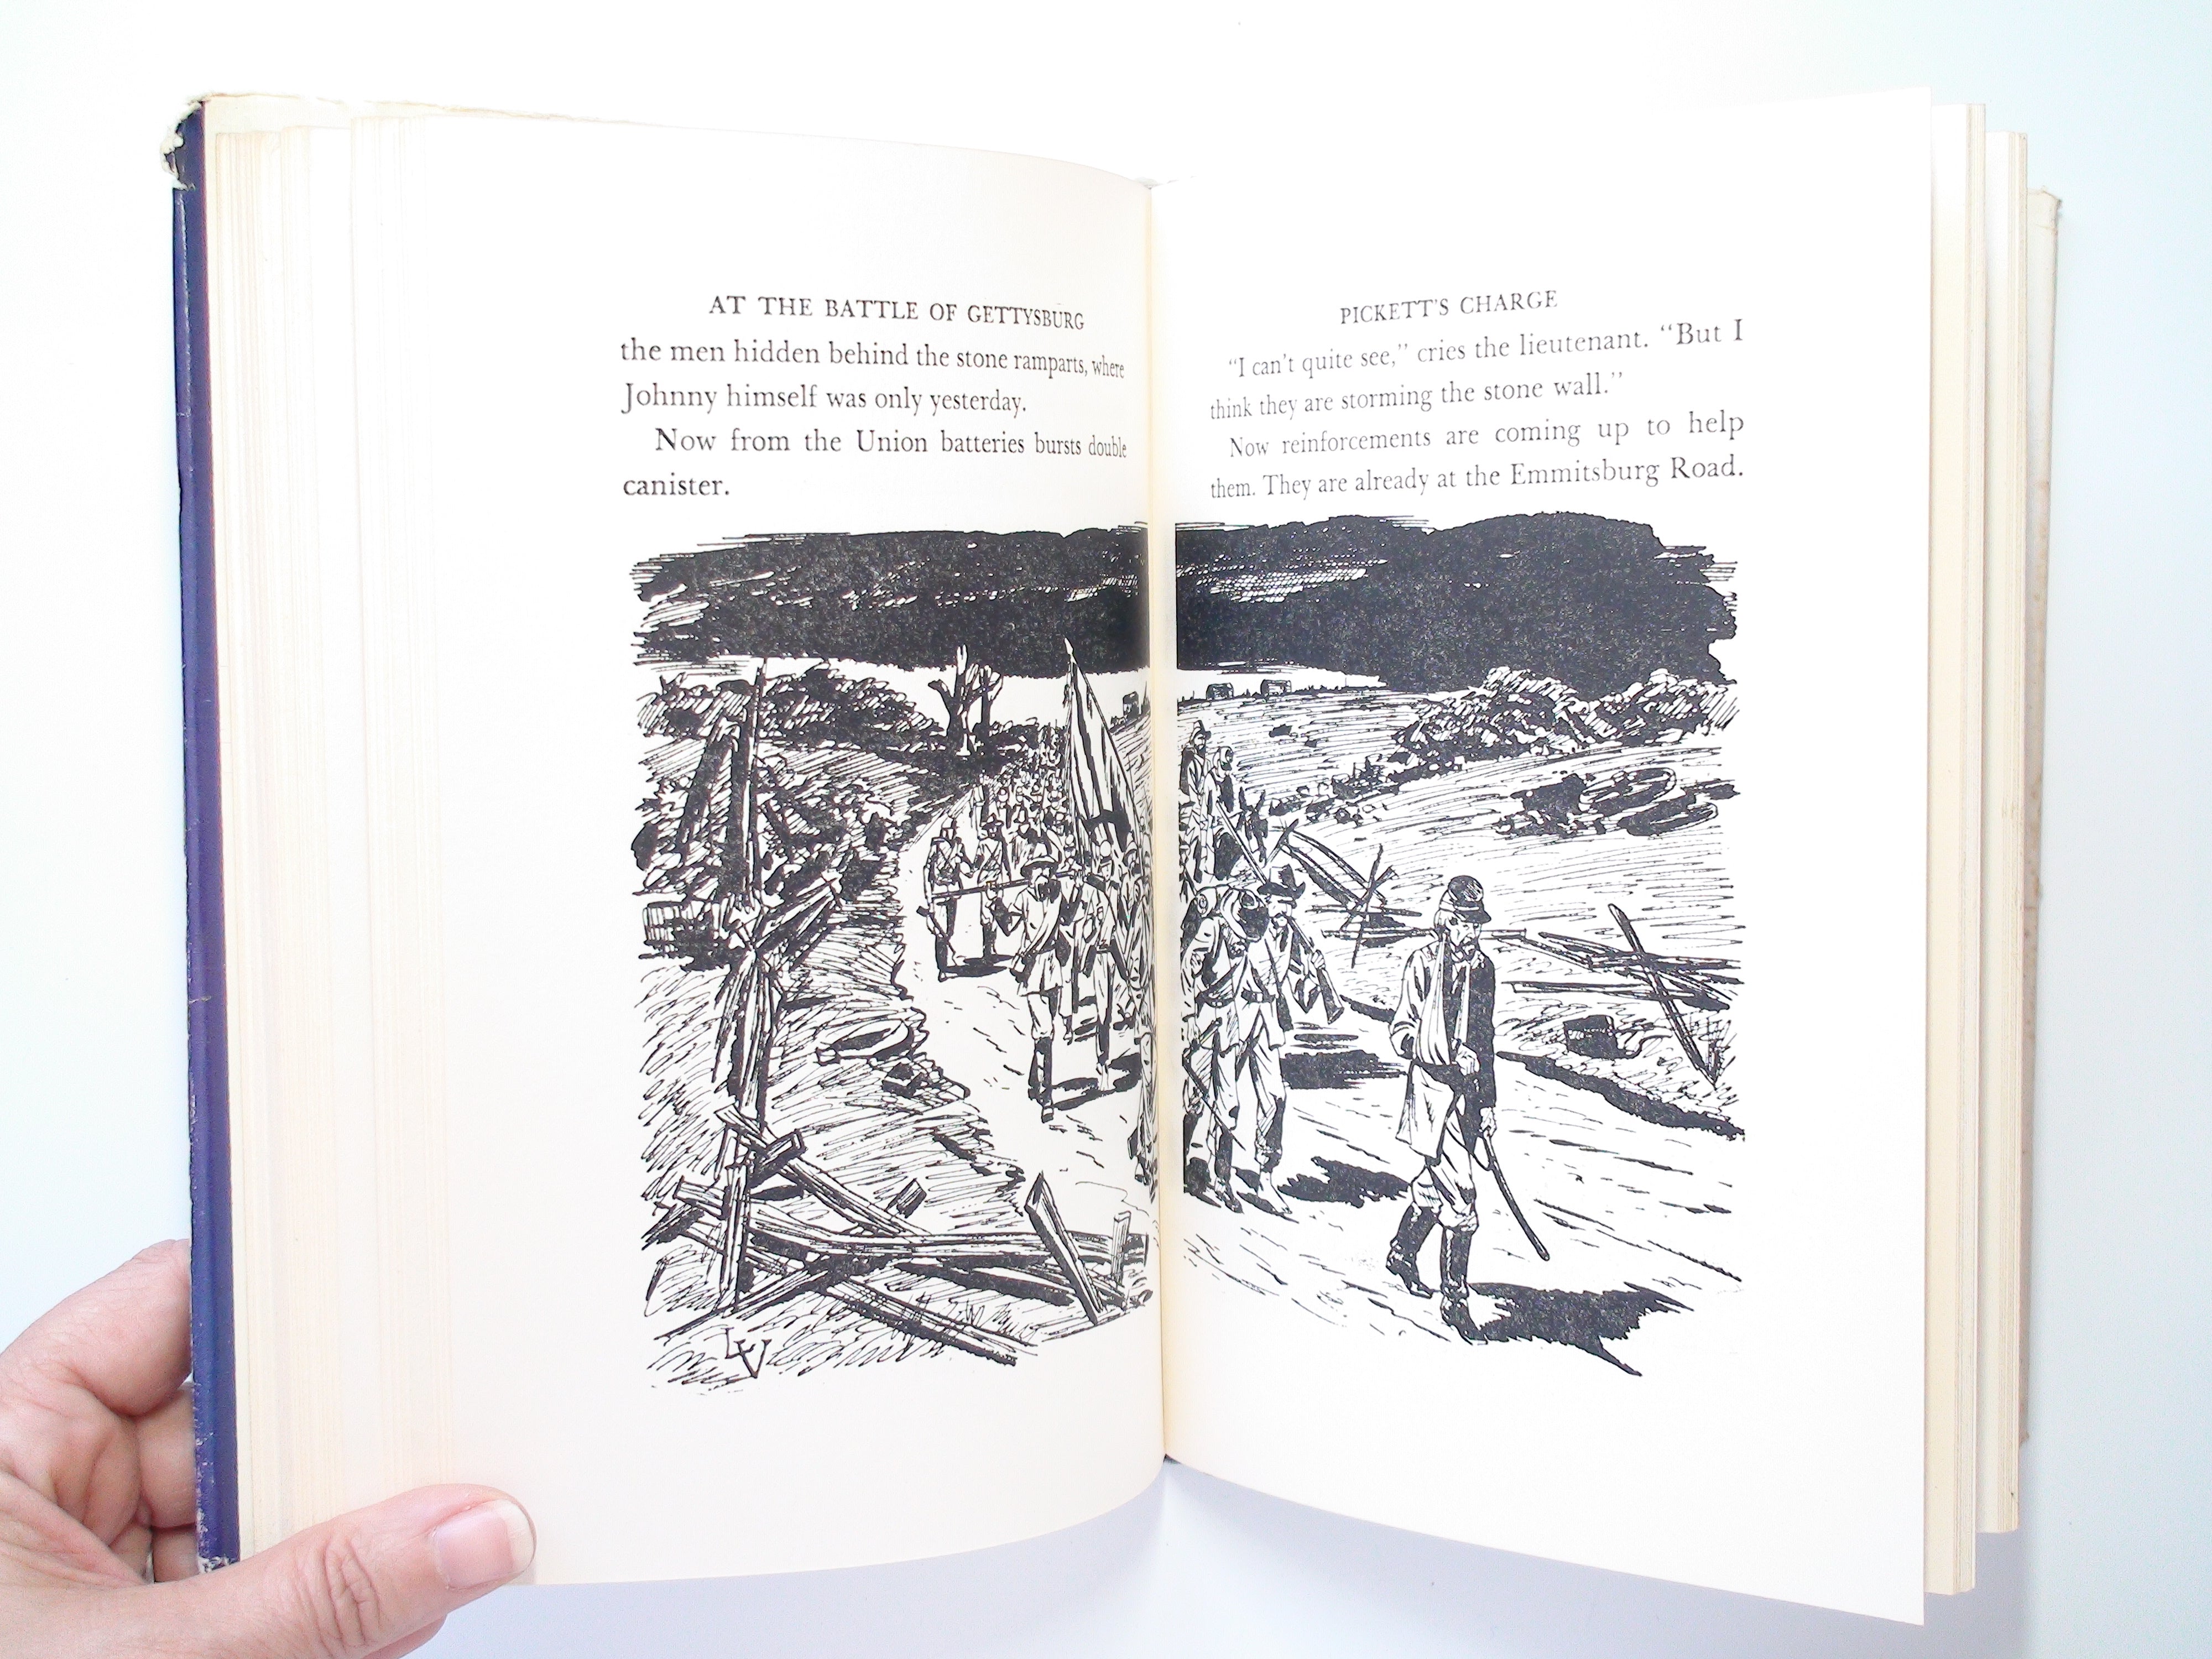 We Were There at the Battle of Gettysburg, Alida Sims Malkus, Illustrated, 1955